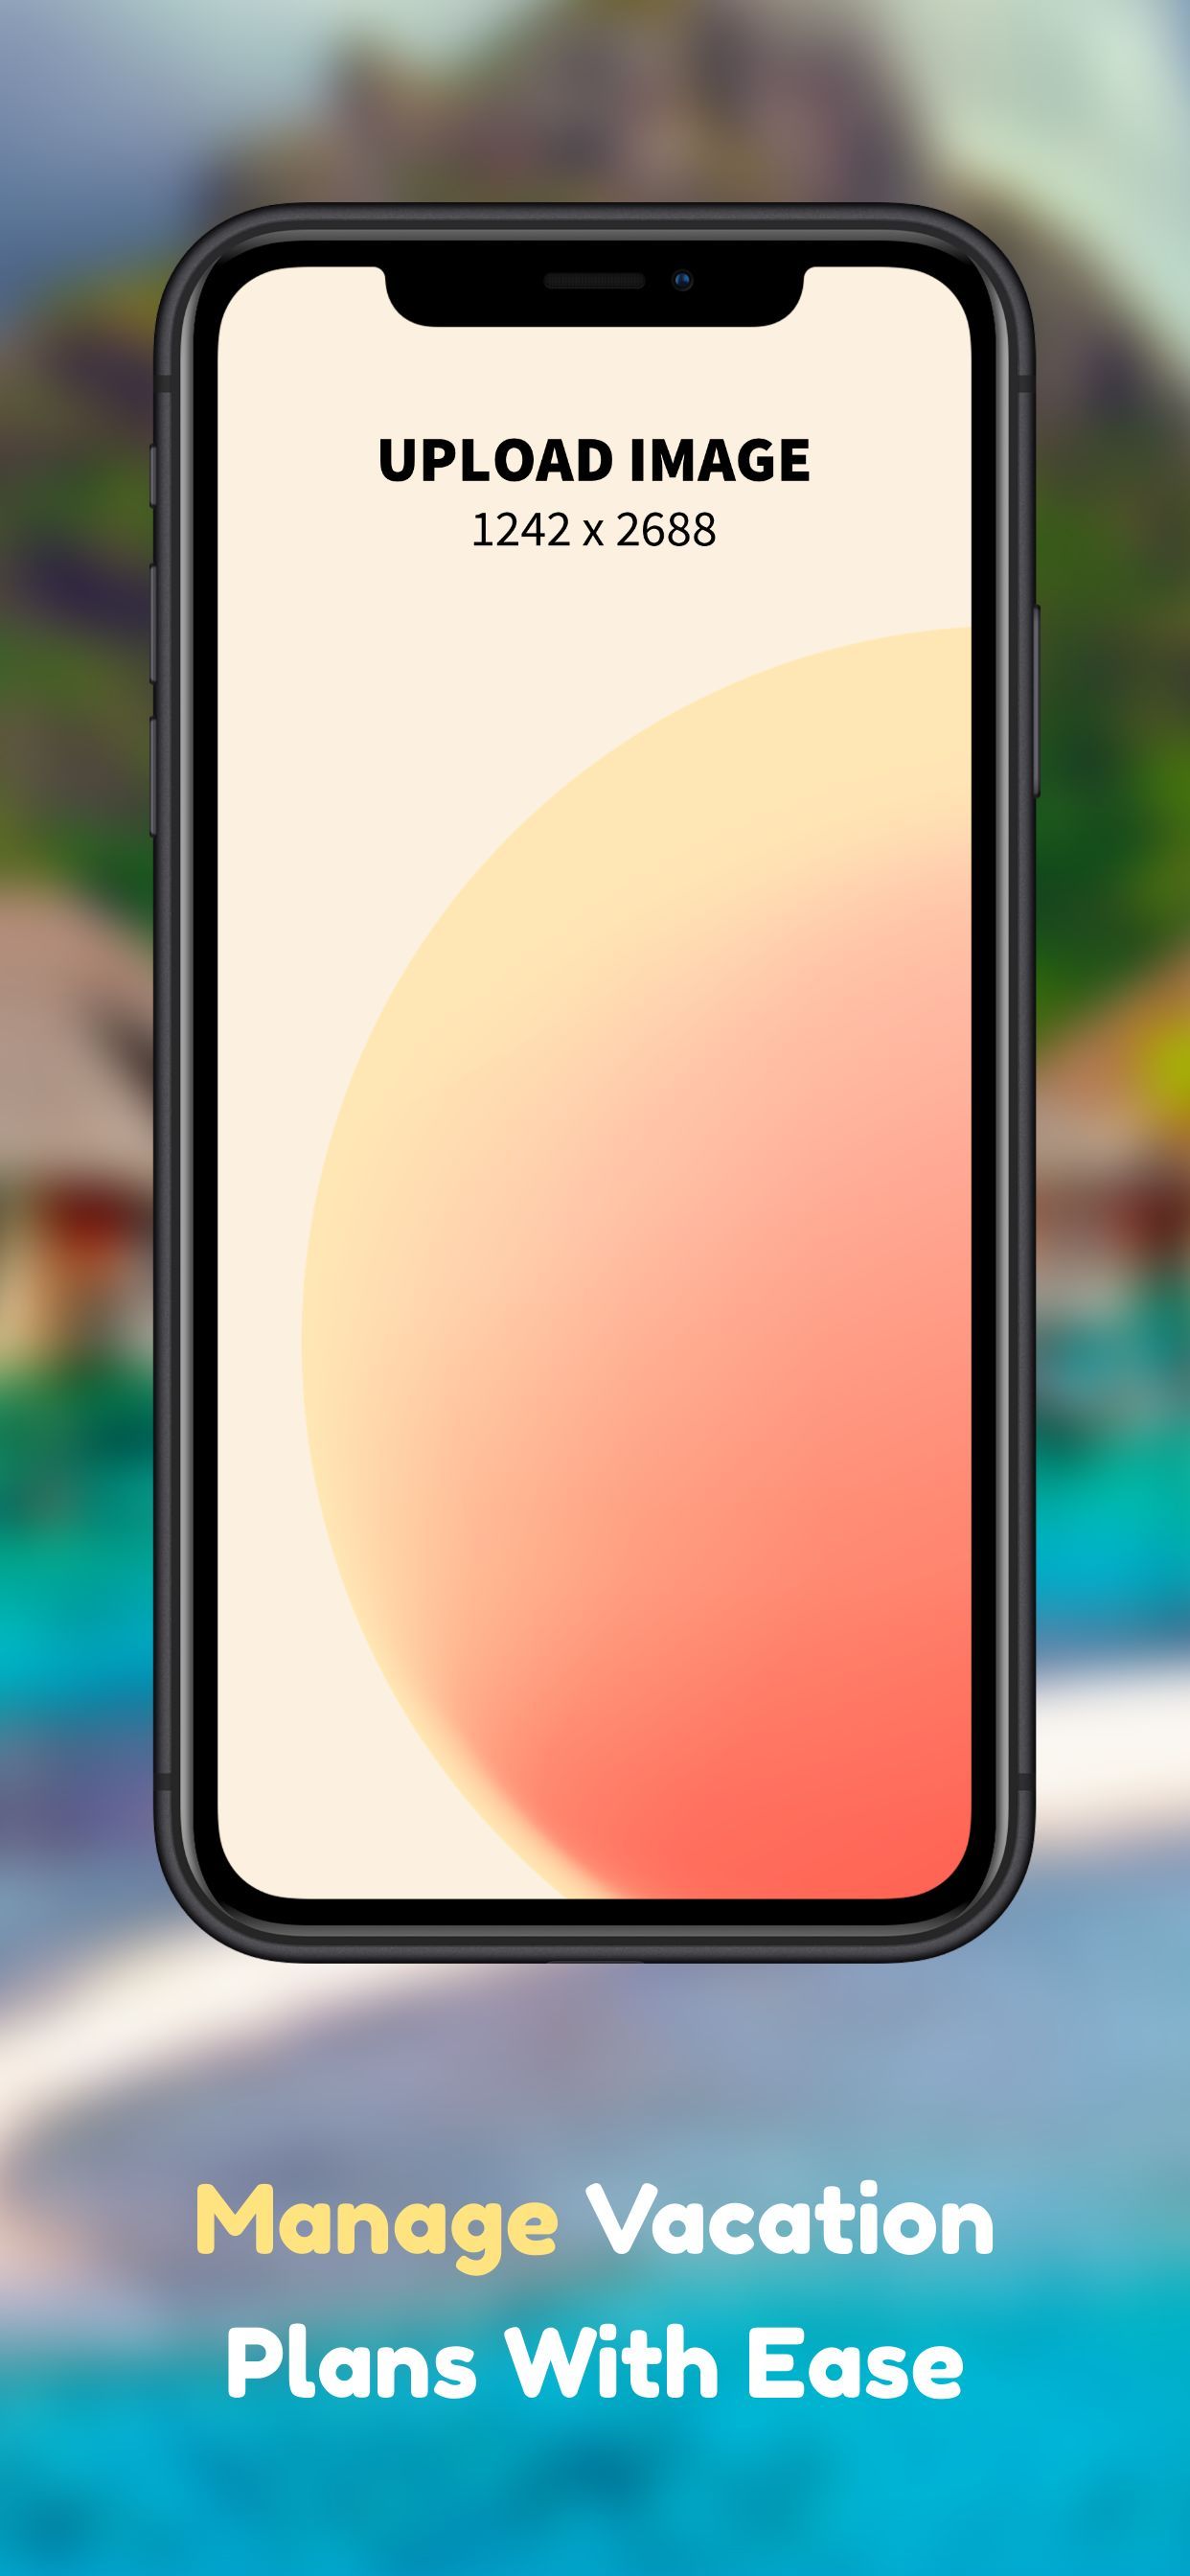 iPhone XS Max Screenshot 58 template. Quickly edit text, colors, images, and more for free.